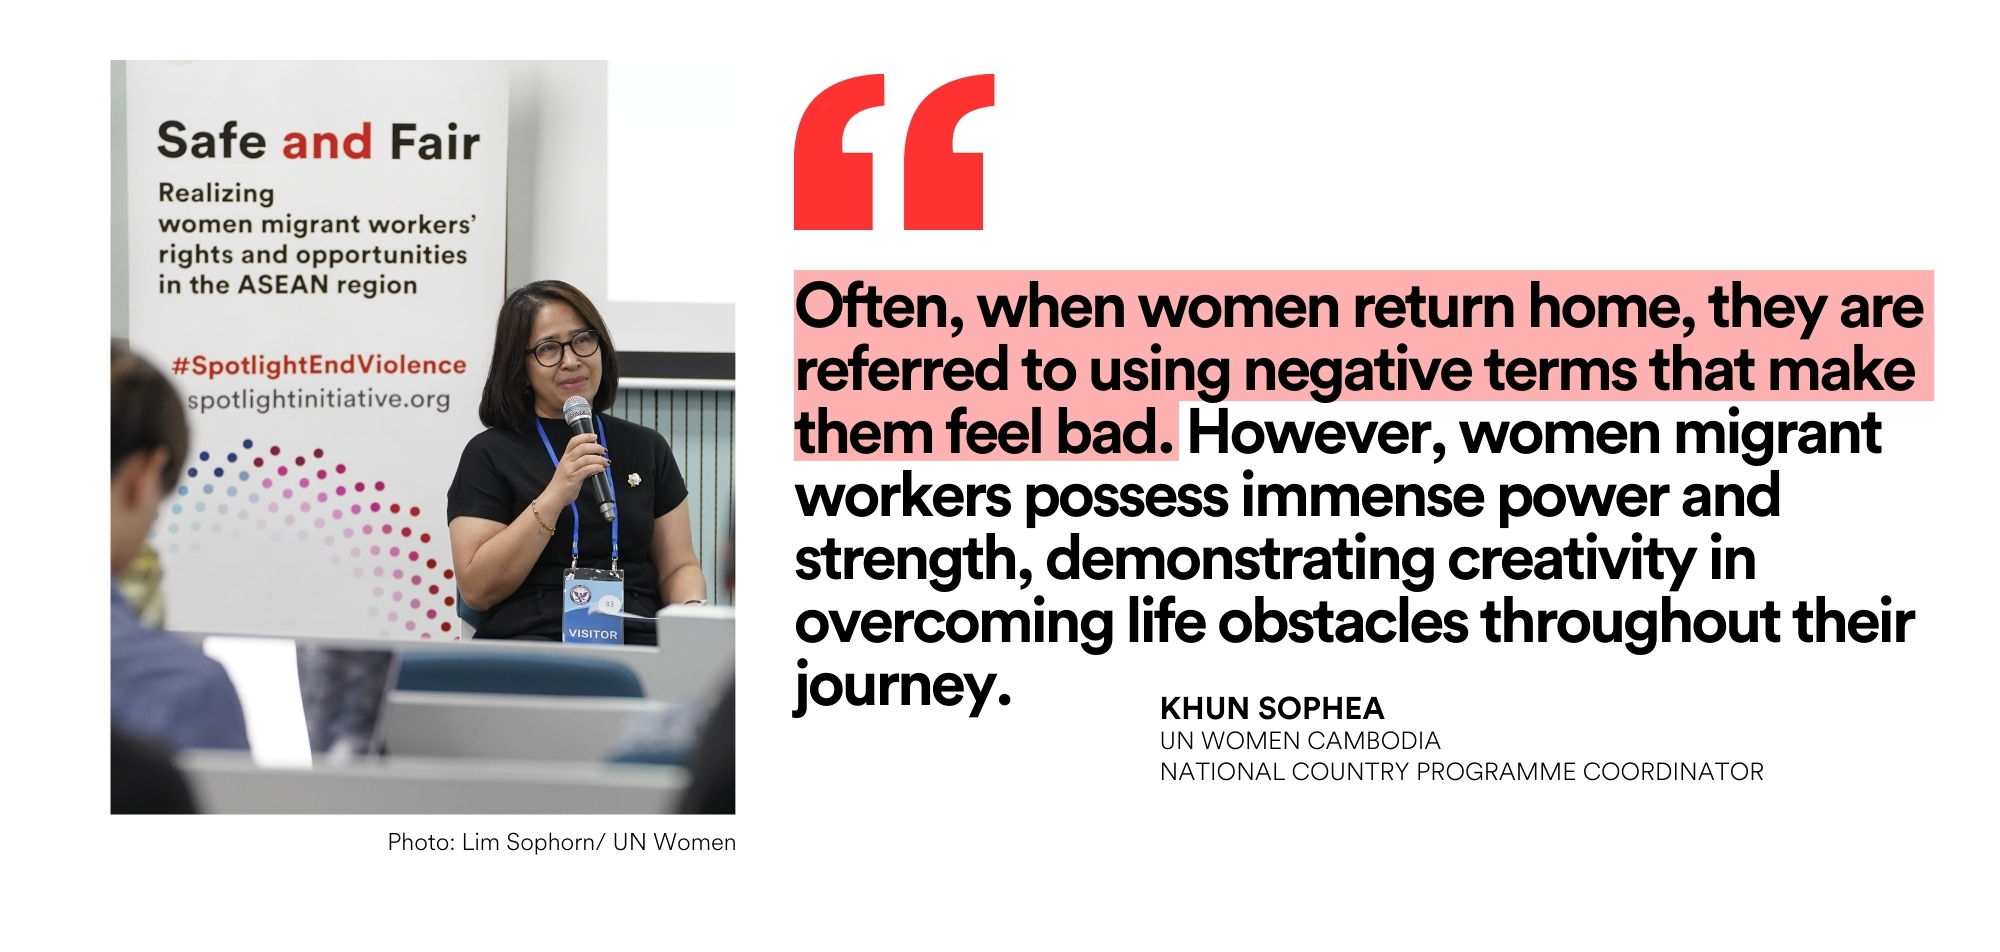 Khun Sophea of UN Women Cambodia explains that the Cambodian media landscape has often used terminology to describe Cambodian women migrant workers which has failed to recognise and protect their strength and contribution. 